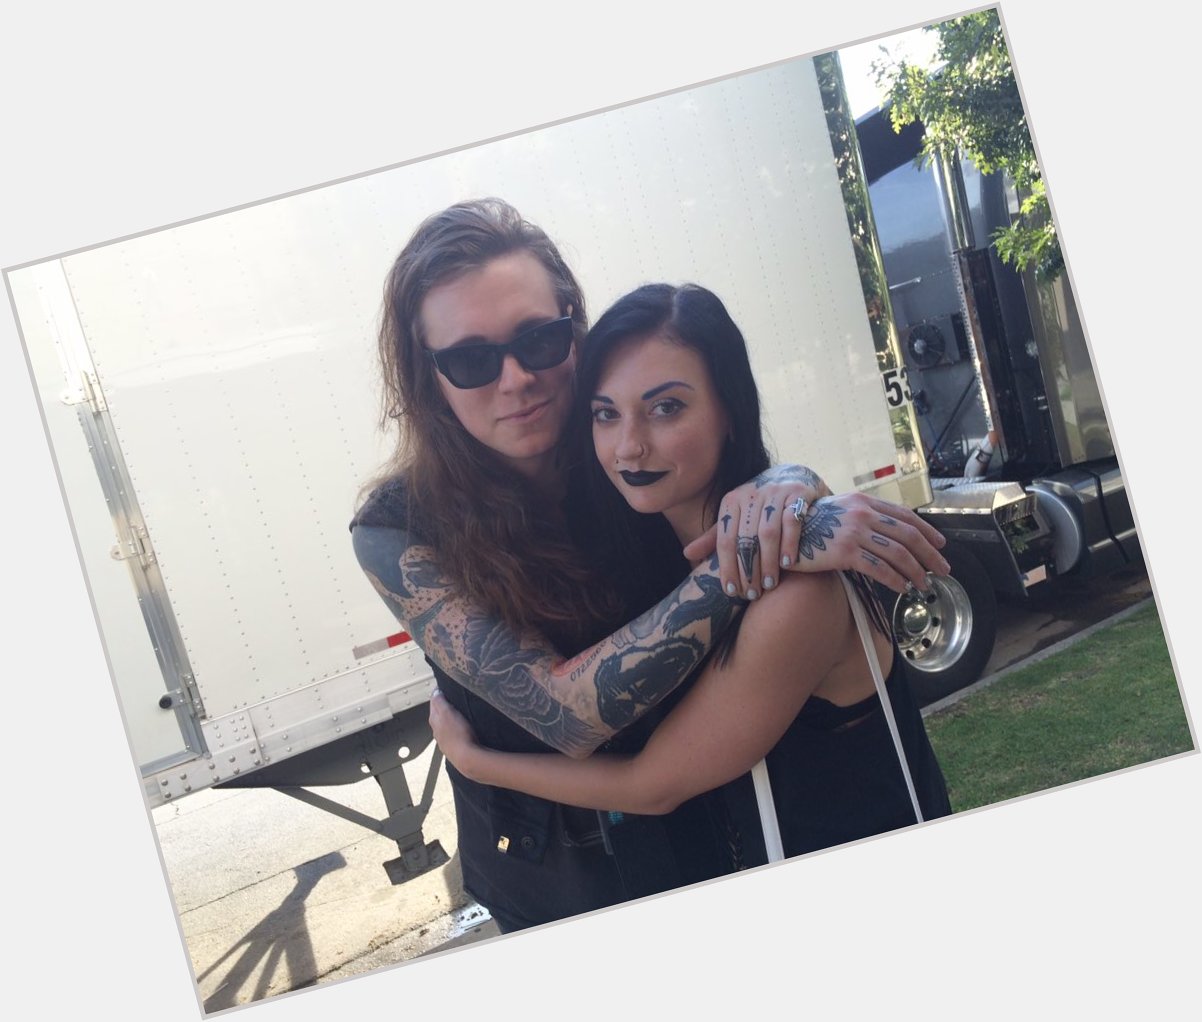 Happy Birthday to the incredible Laura Jane Grace. Have a great day! I miss you, hope to see you again soon! 